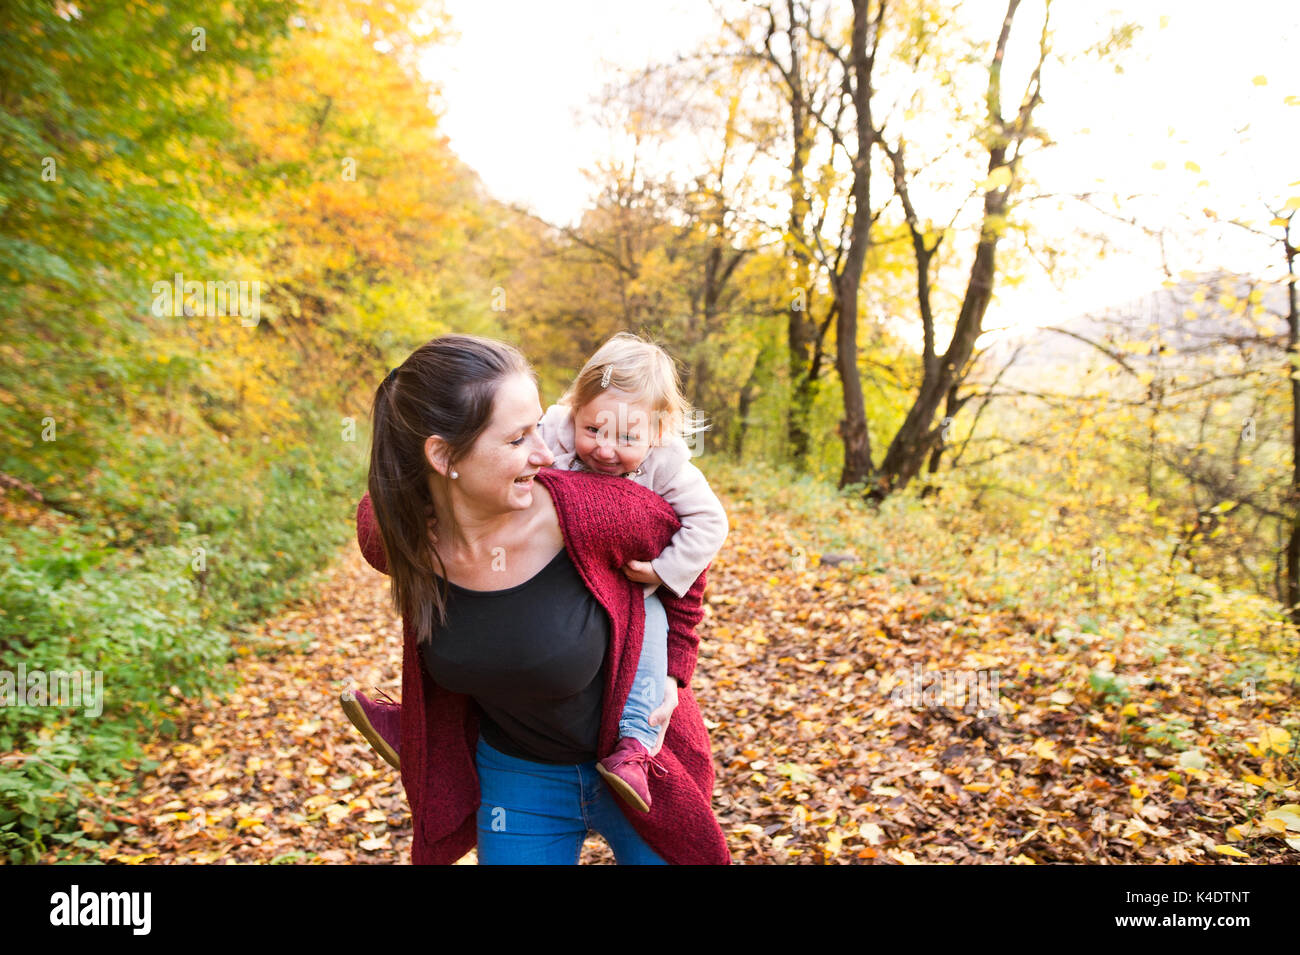 Mother and daughter on a walk in autumn forest Stock Photo - Alamy